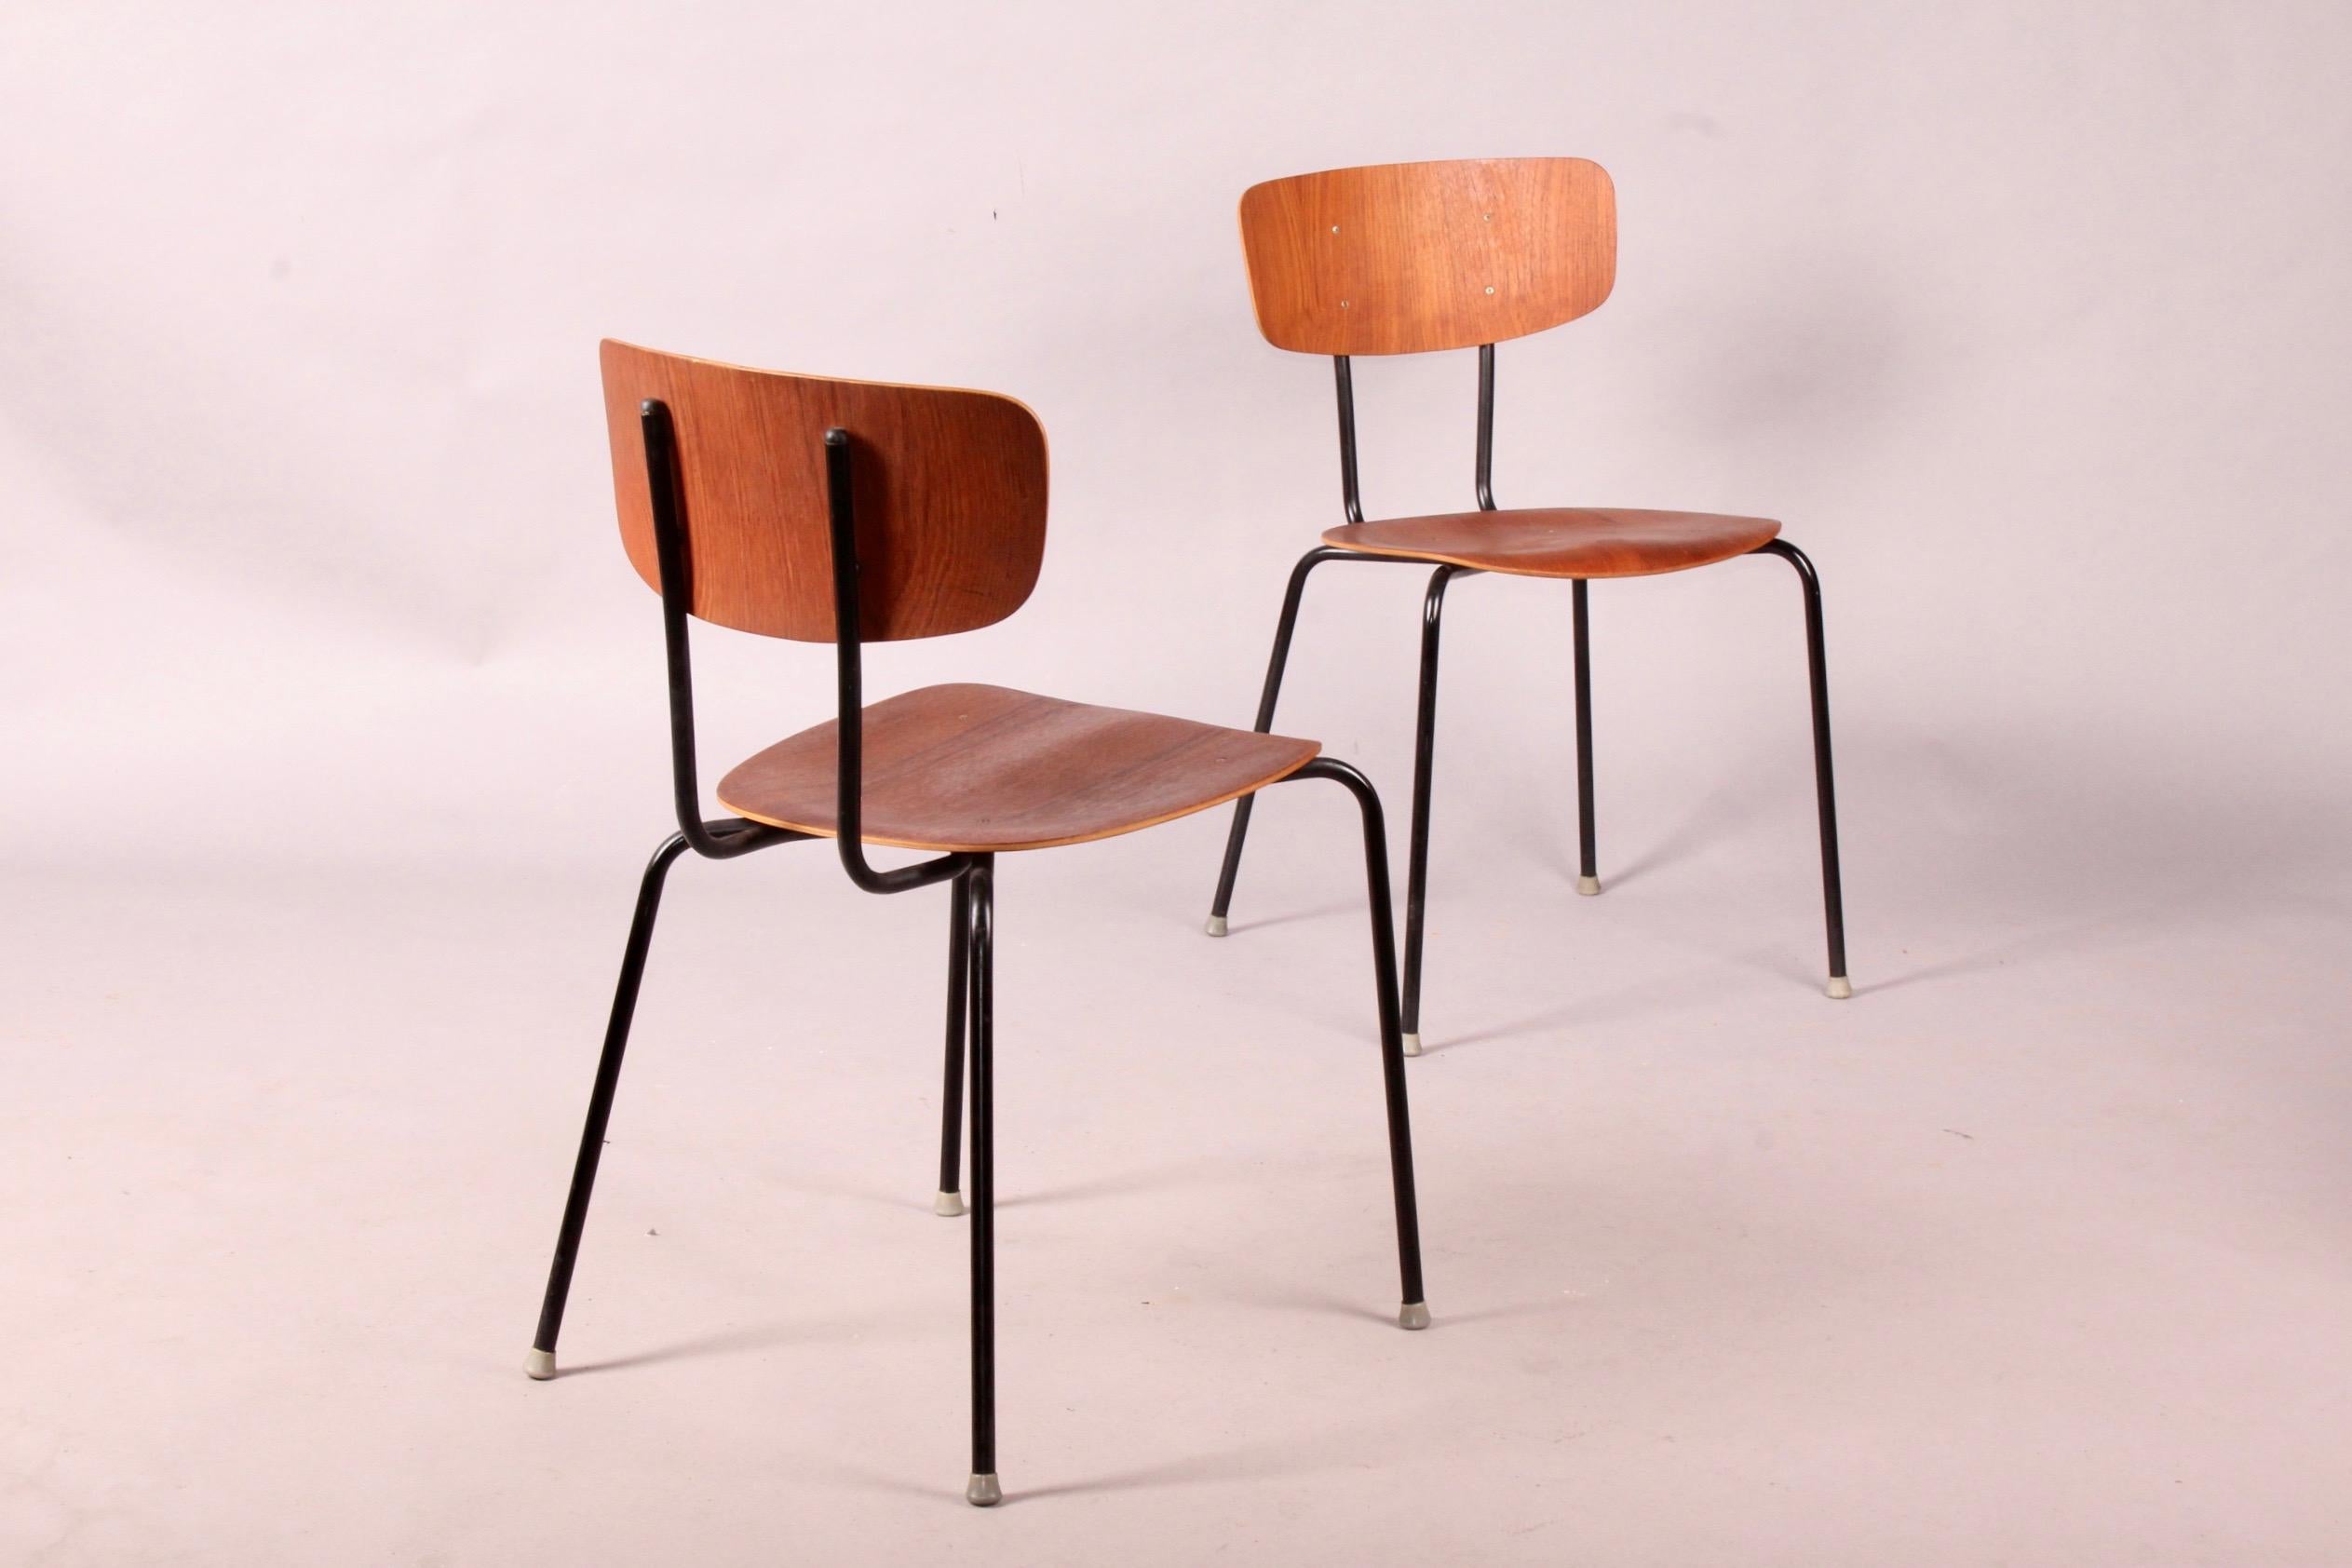 European Pair of Plywood Chairs